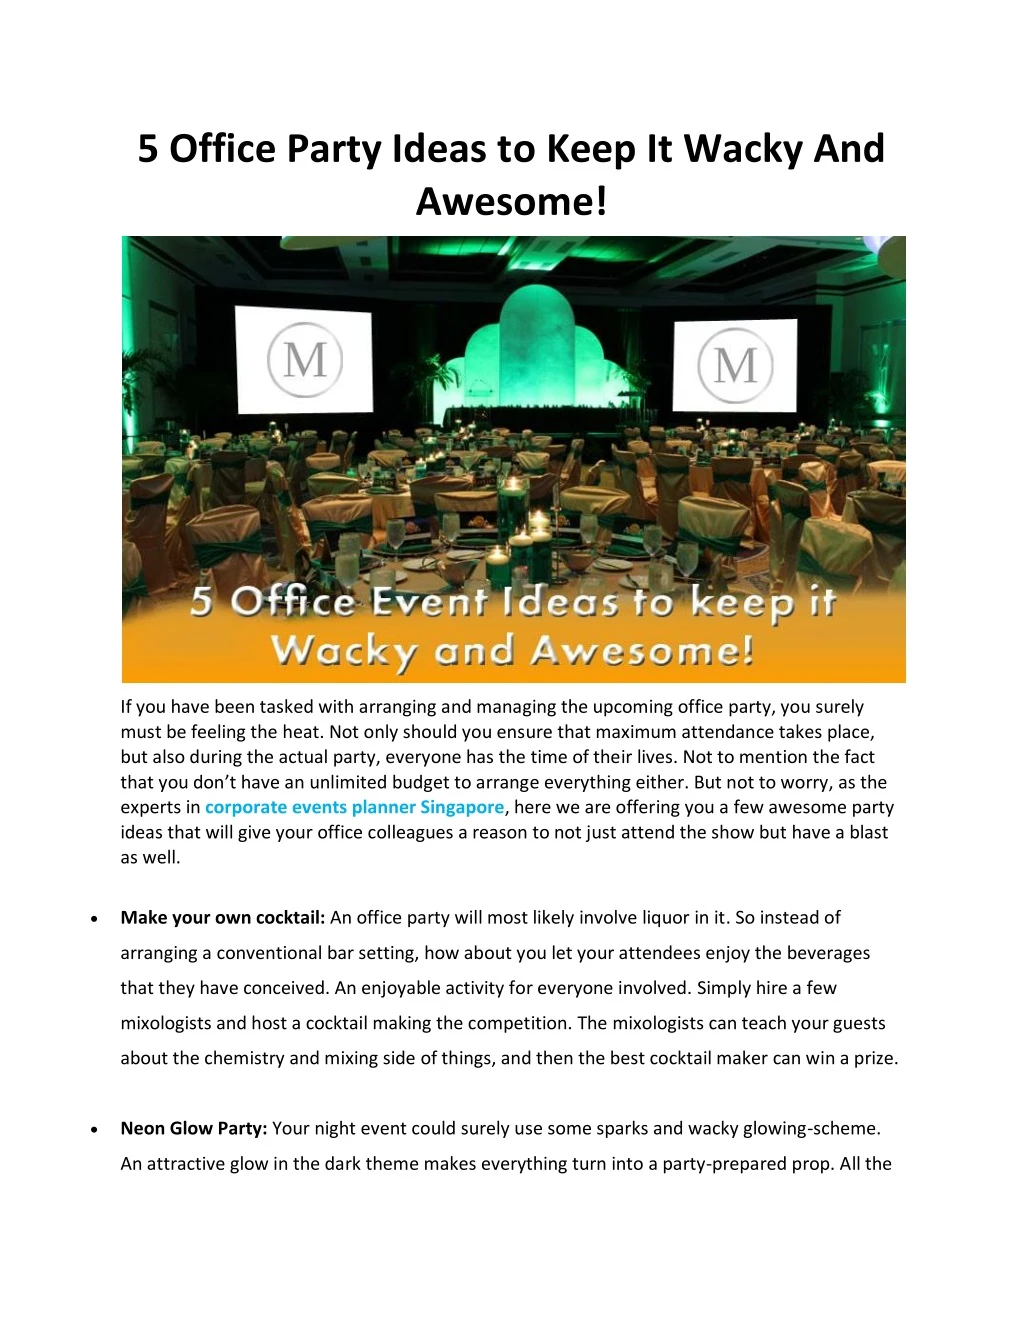 5 office party ideas to keep it wacky and awesome